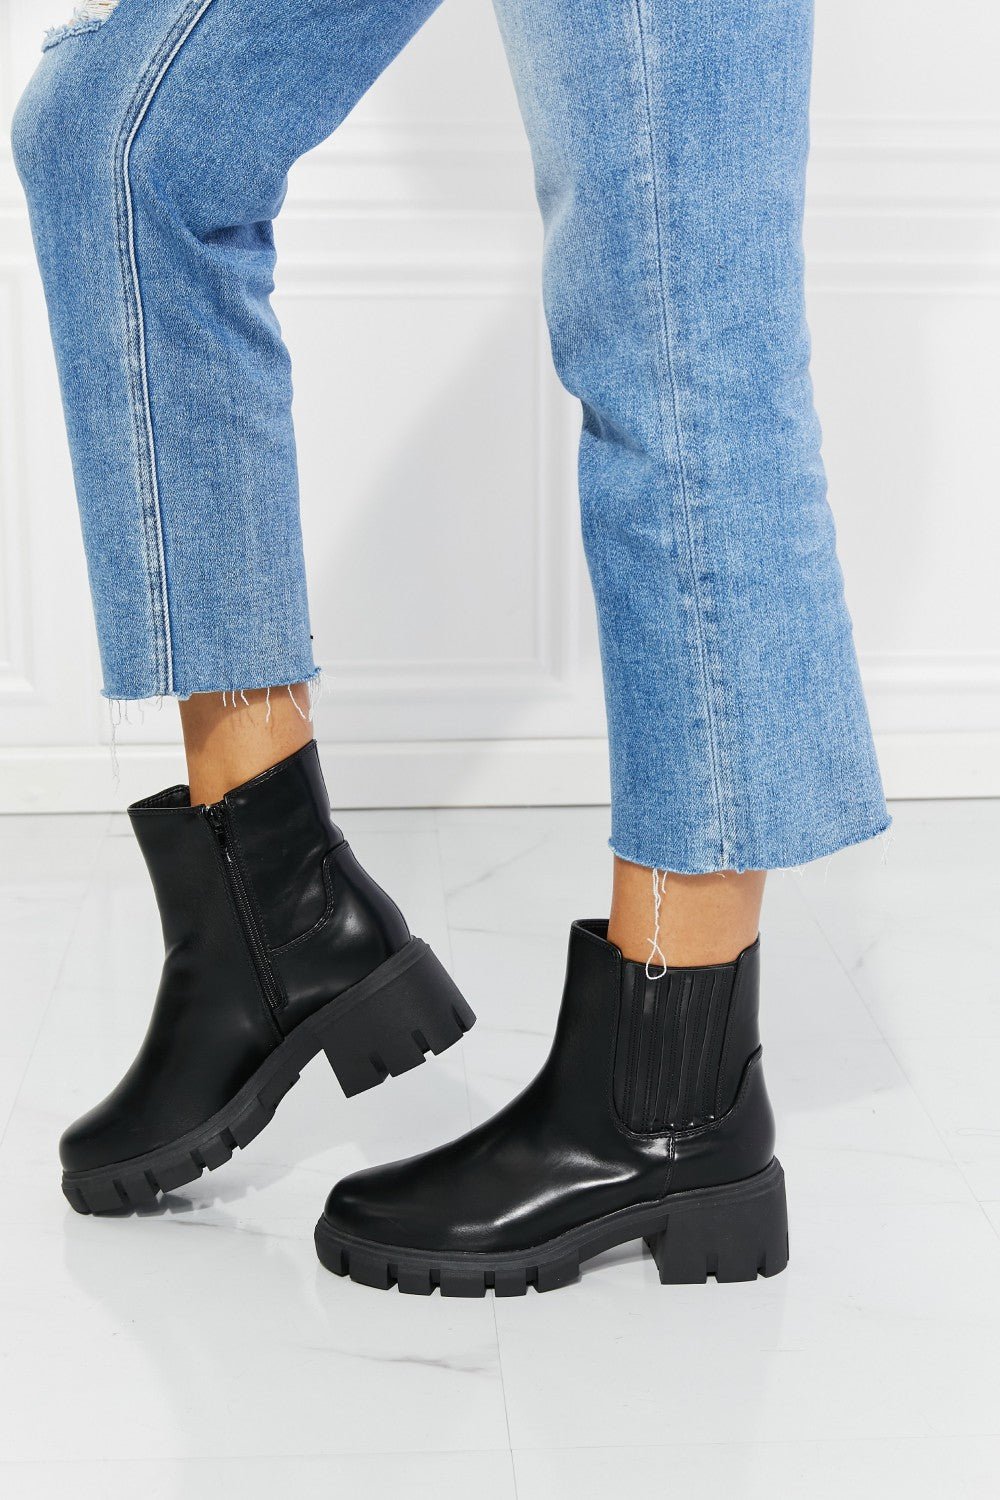 What It Takes Lug Sole Chelsea Boots in Black - Mack & Harvie